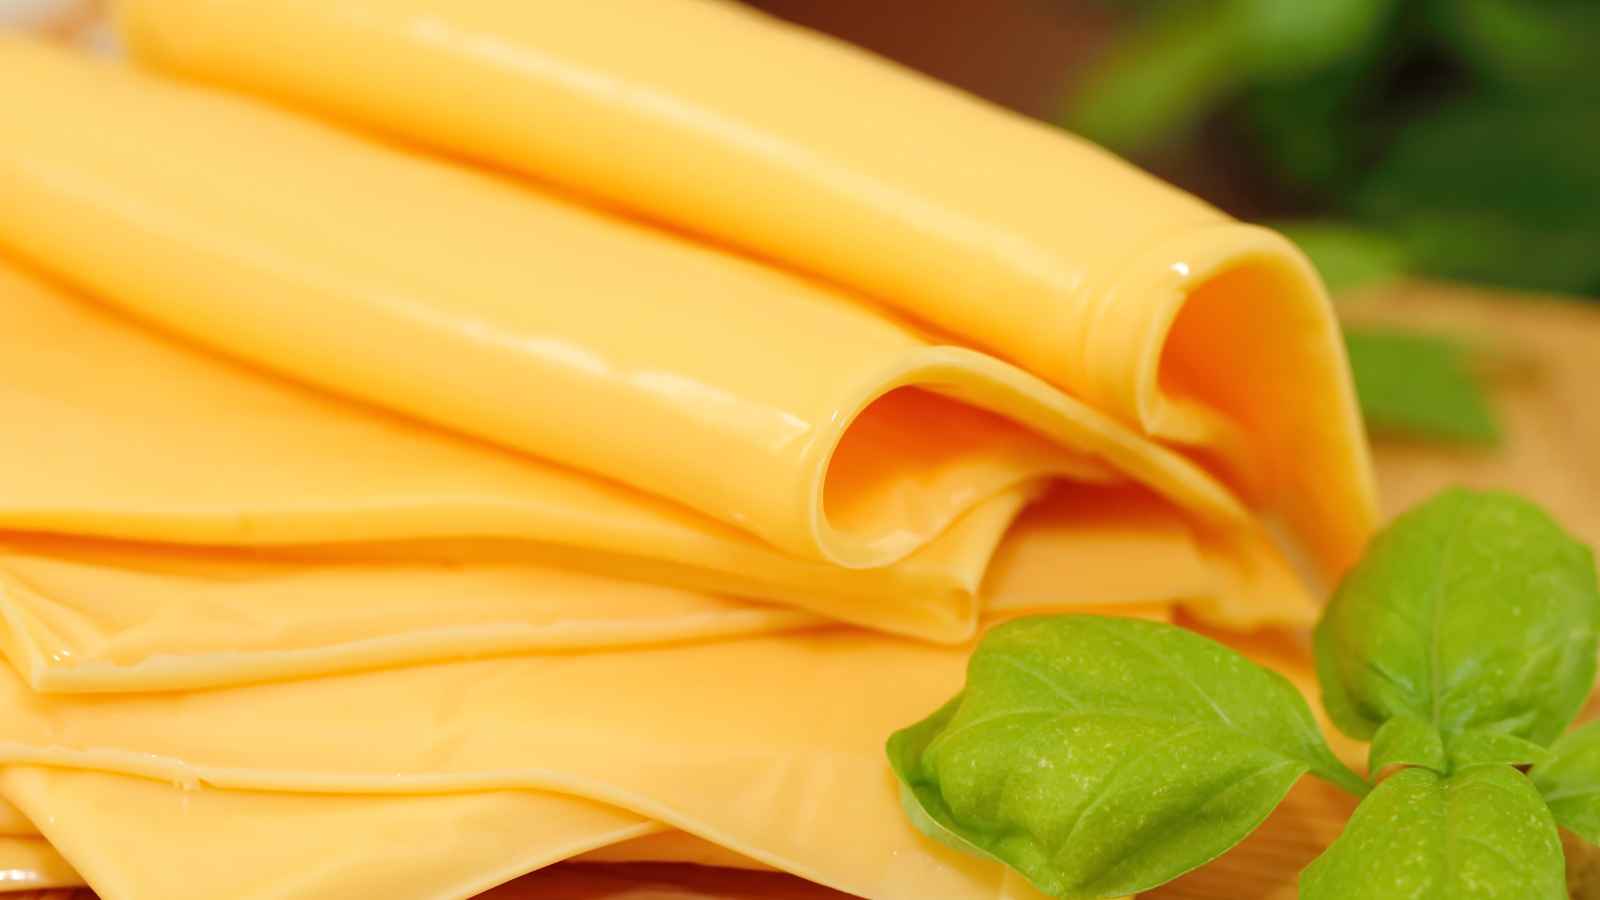 <p><span>According to research, processed cheese is primarily utilized in </span><a href="https://www.flannelsorflipflops.com/25-foods-you-didnt-know-were-killing-your-metabolism/"><span>fast-food </span></a><span>establishments as a topping for various dishes. Regularly consuming processed cheese may result in weight gain and obesity due to its high-calorie content. Additionally, the elevated salt content in processed cheese can contribute to hypertension.</span></p>